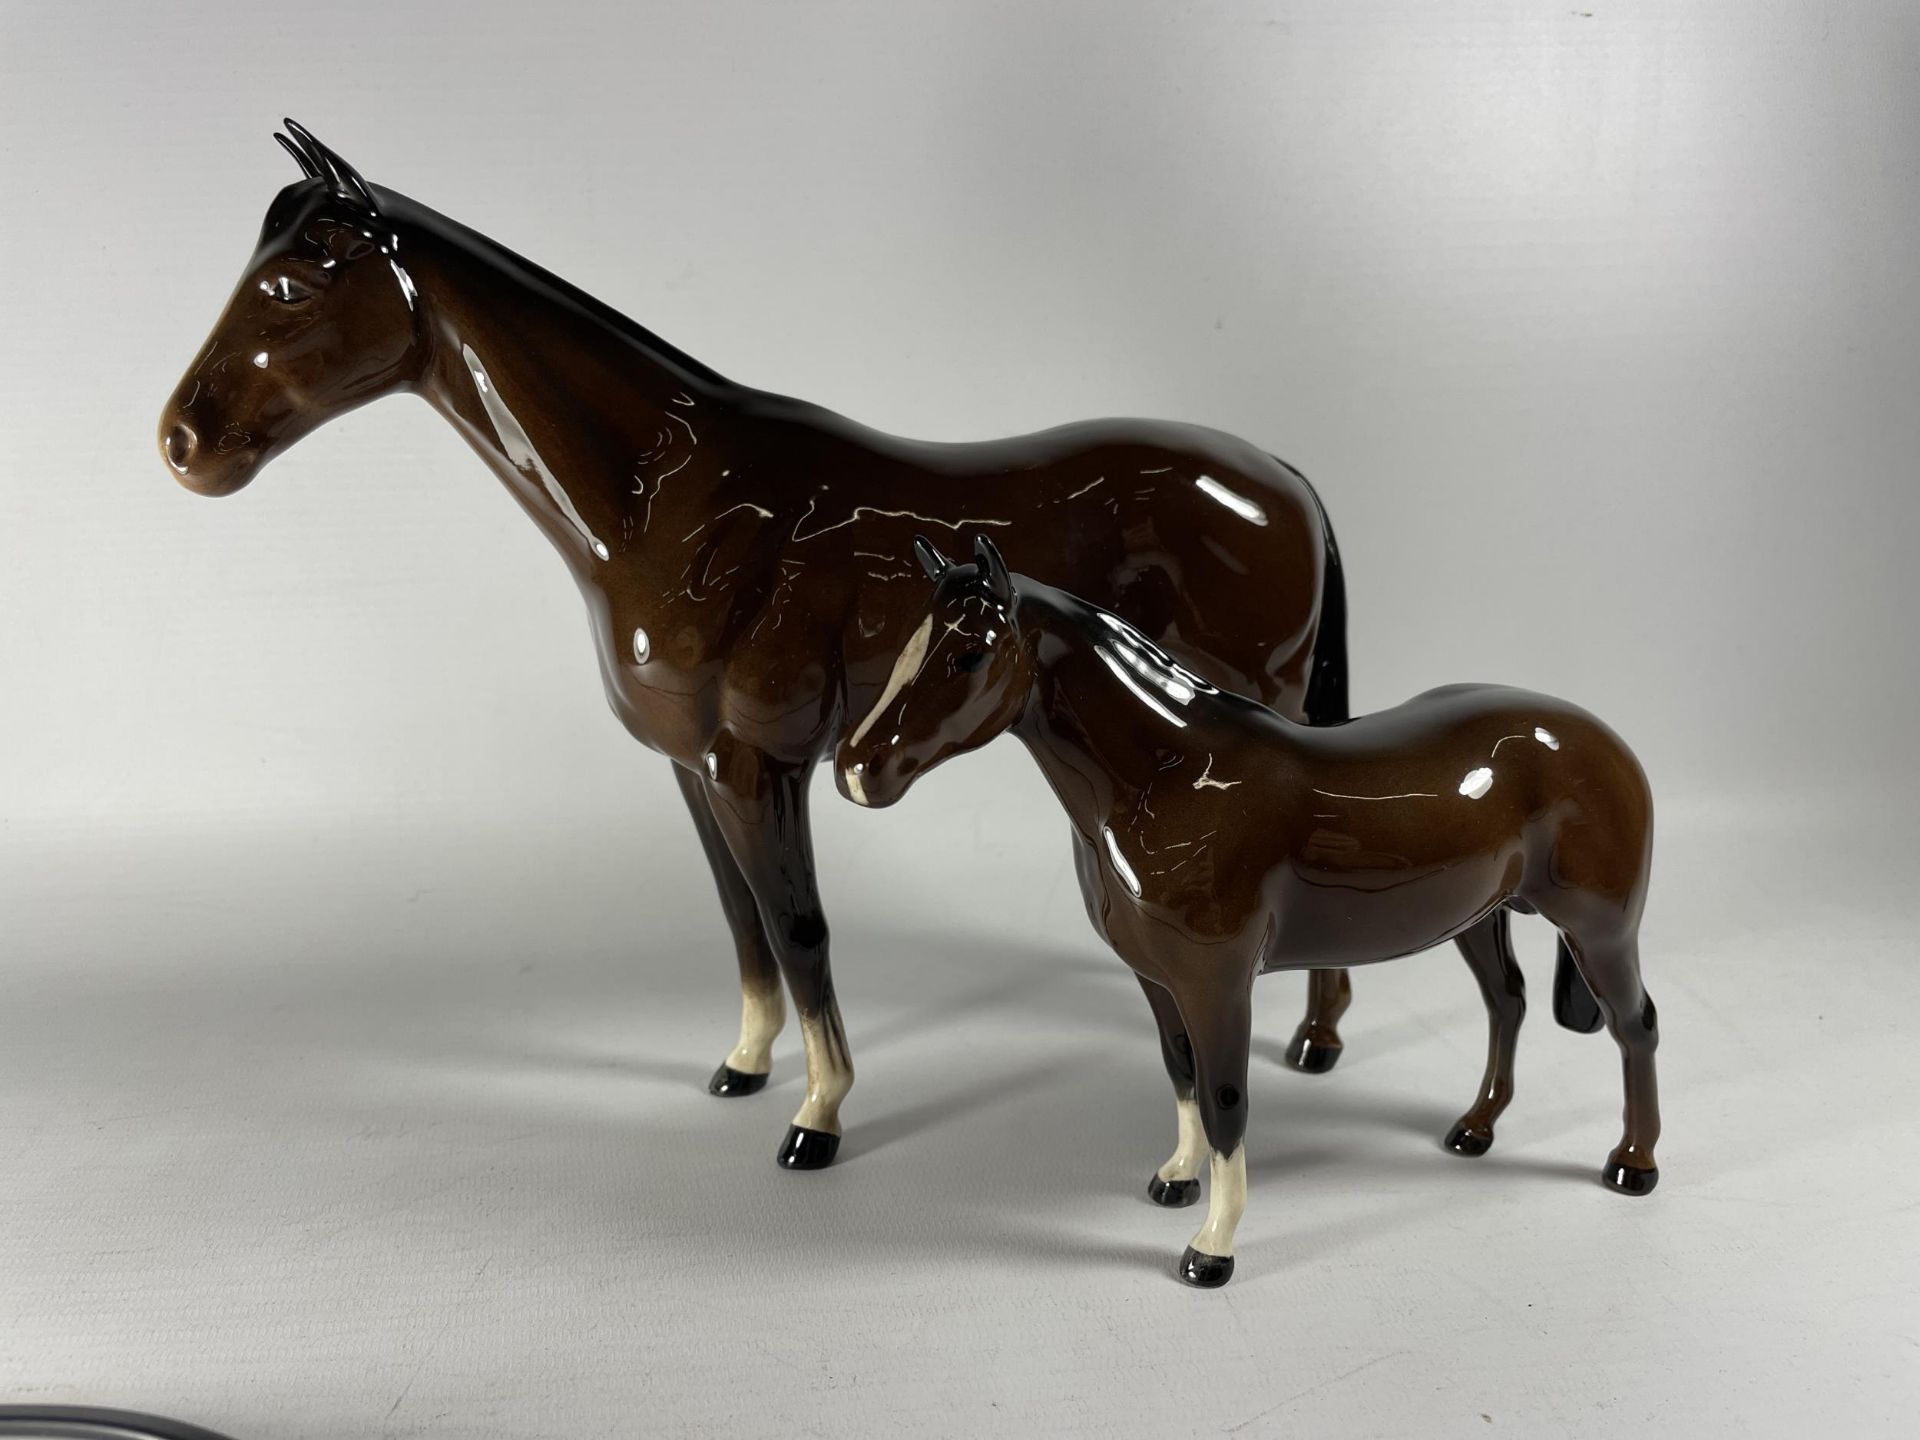 TWO BESWICK BROWN GLOSS HORSE MODELS - BOIS ROUSELL AND LARGE RACEHORSE